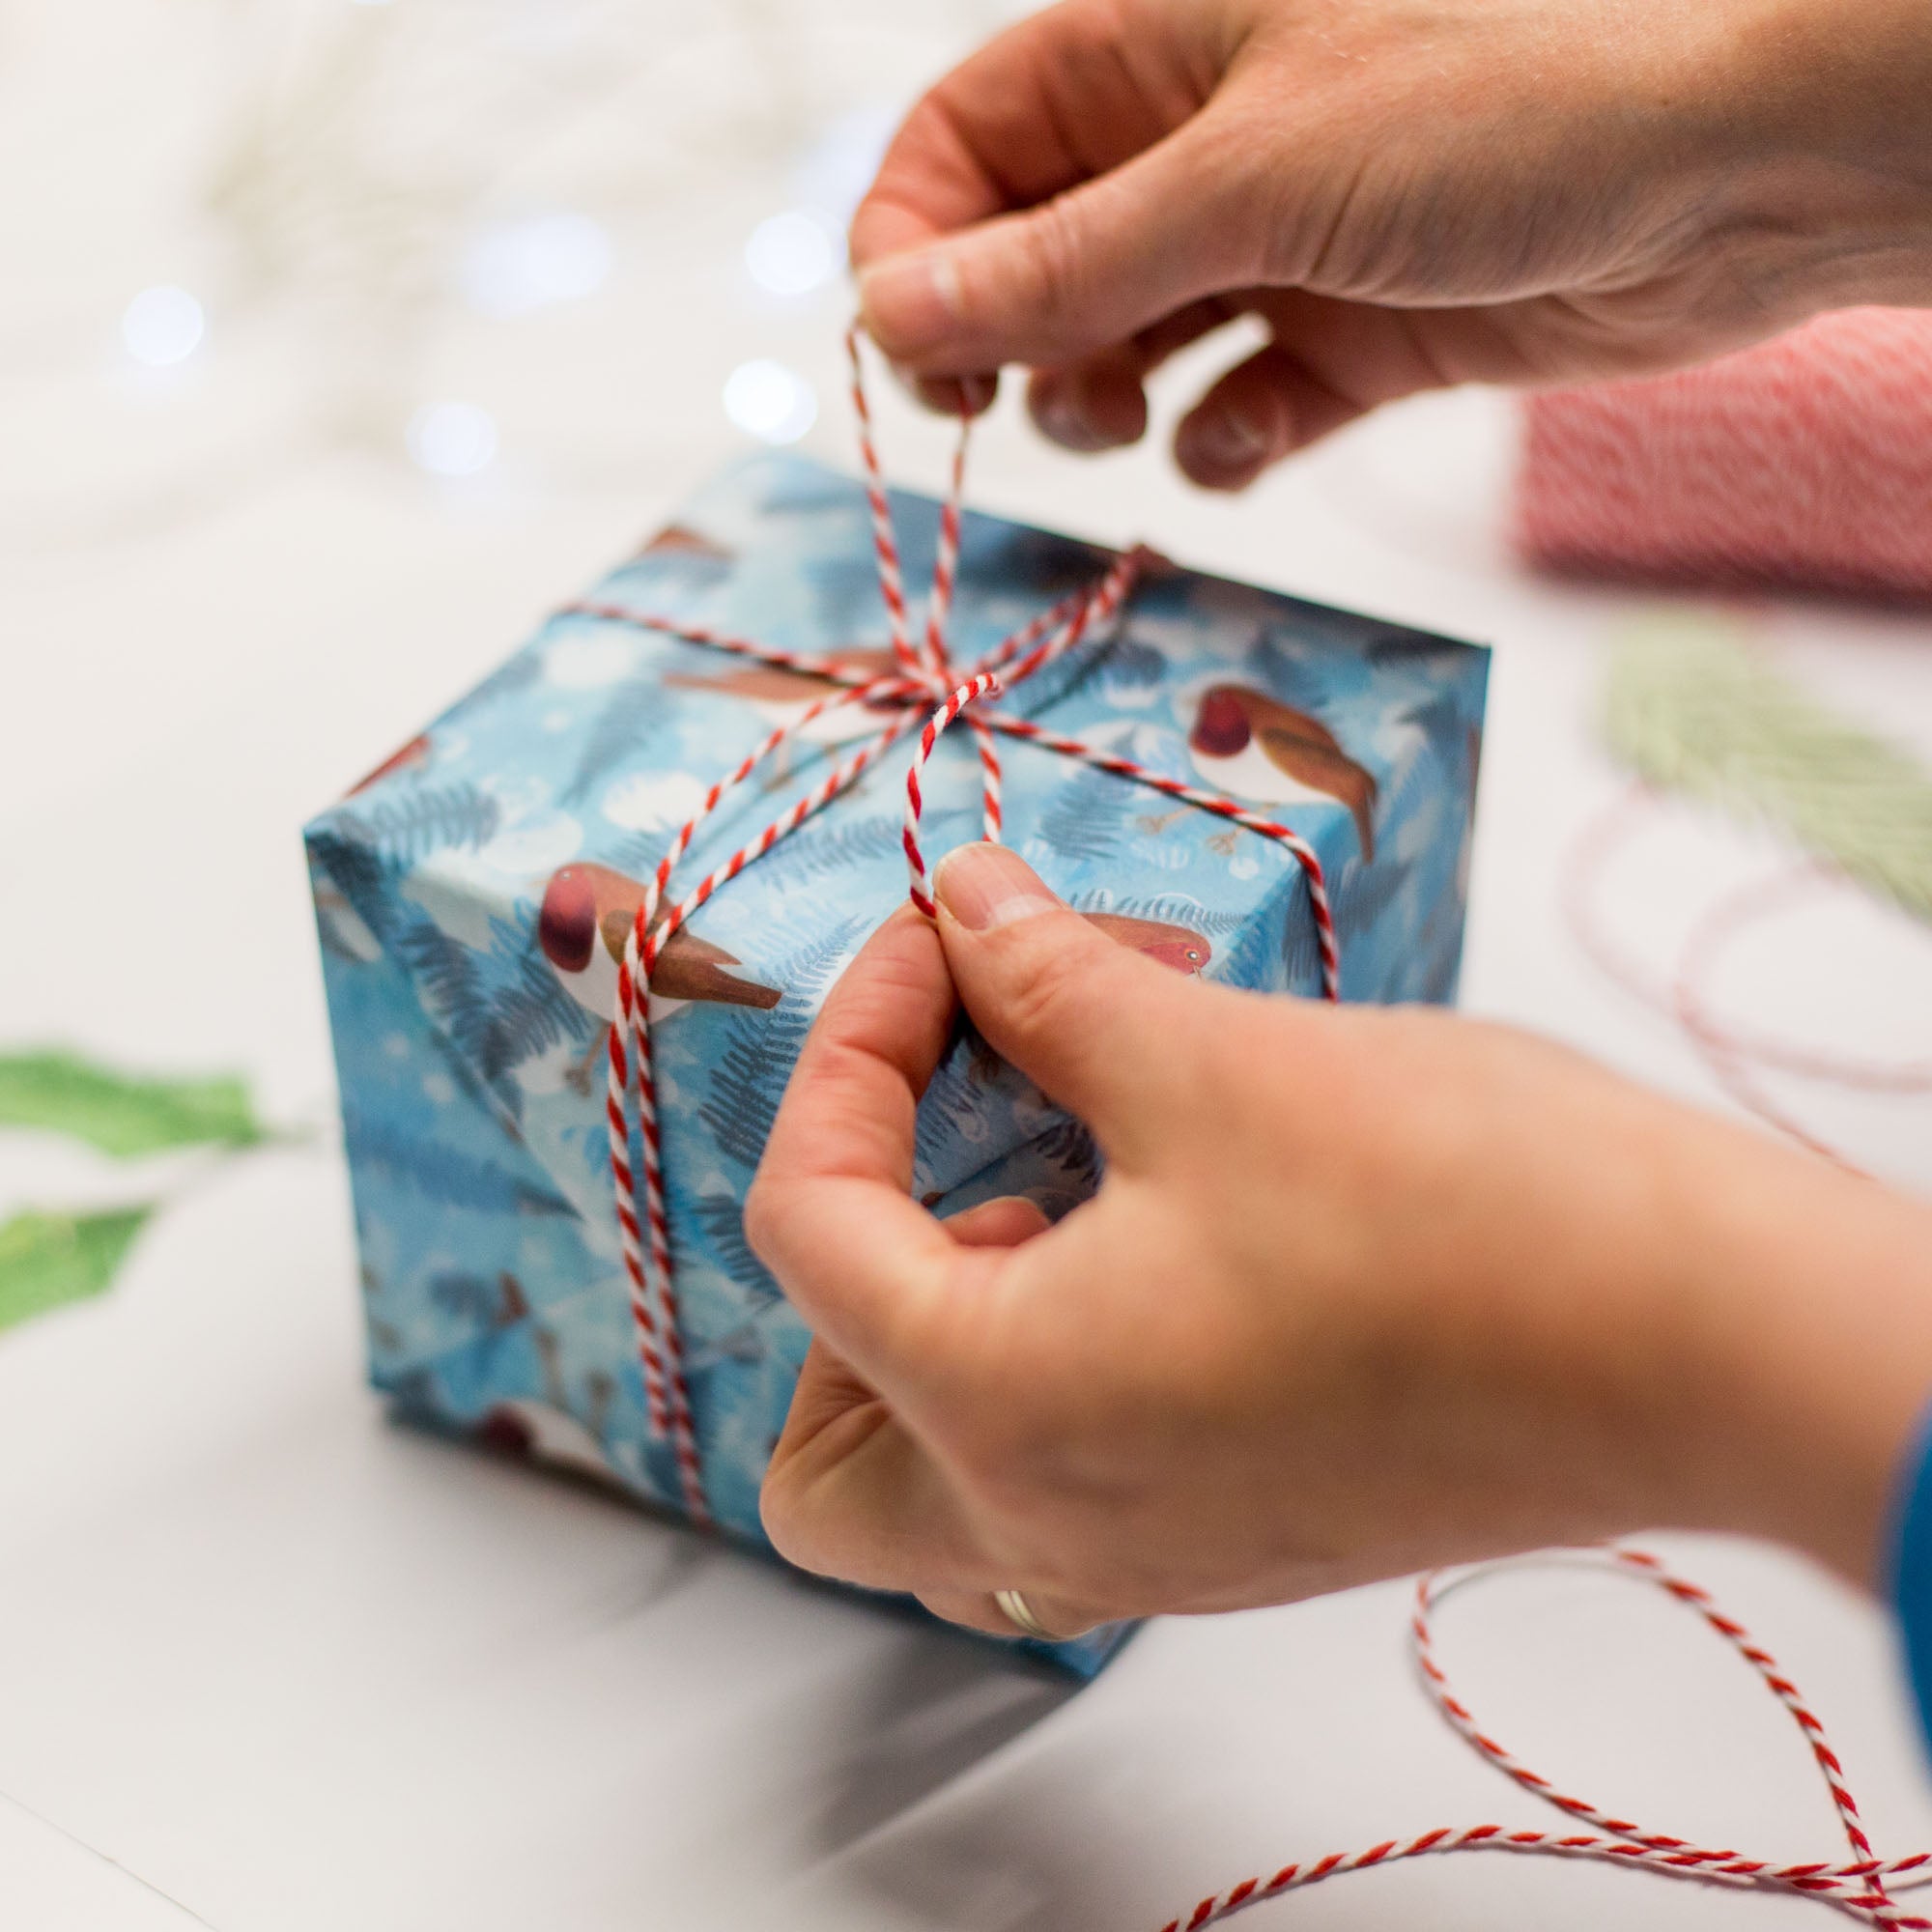 This image features a cubed package wrapped with gorgeous Robin gift wrap paper being finished with white and red string. The gift wrap has a blue background with Foliage dispersed between the charming Robin characters with bright red chests.